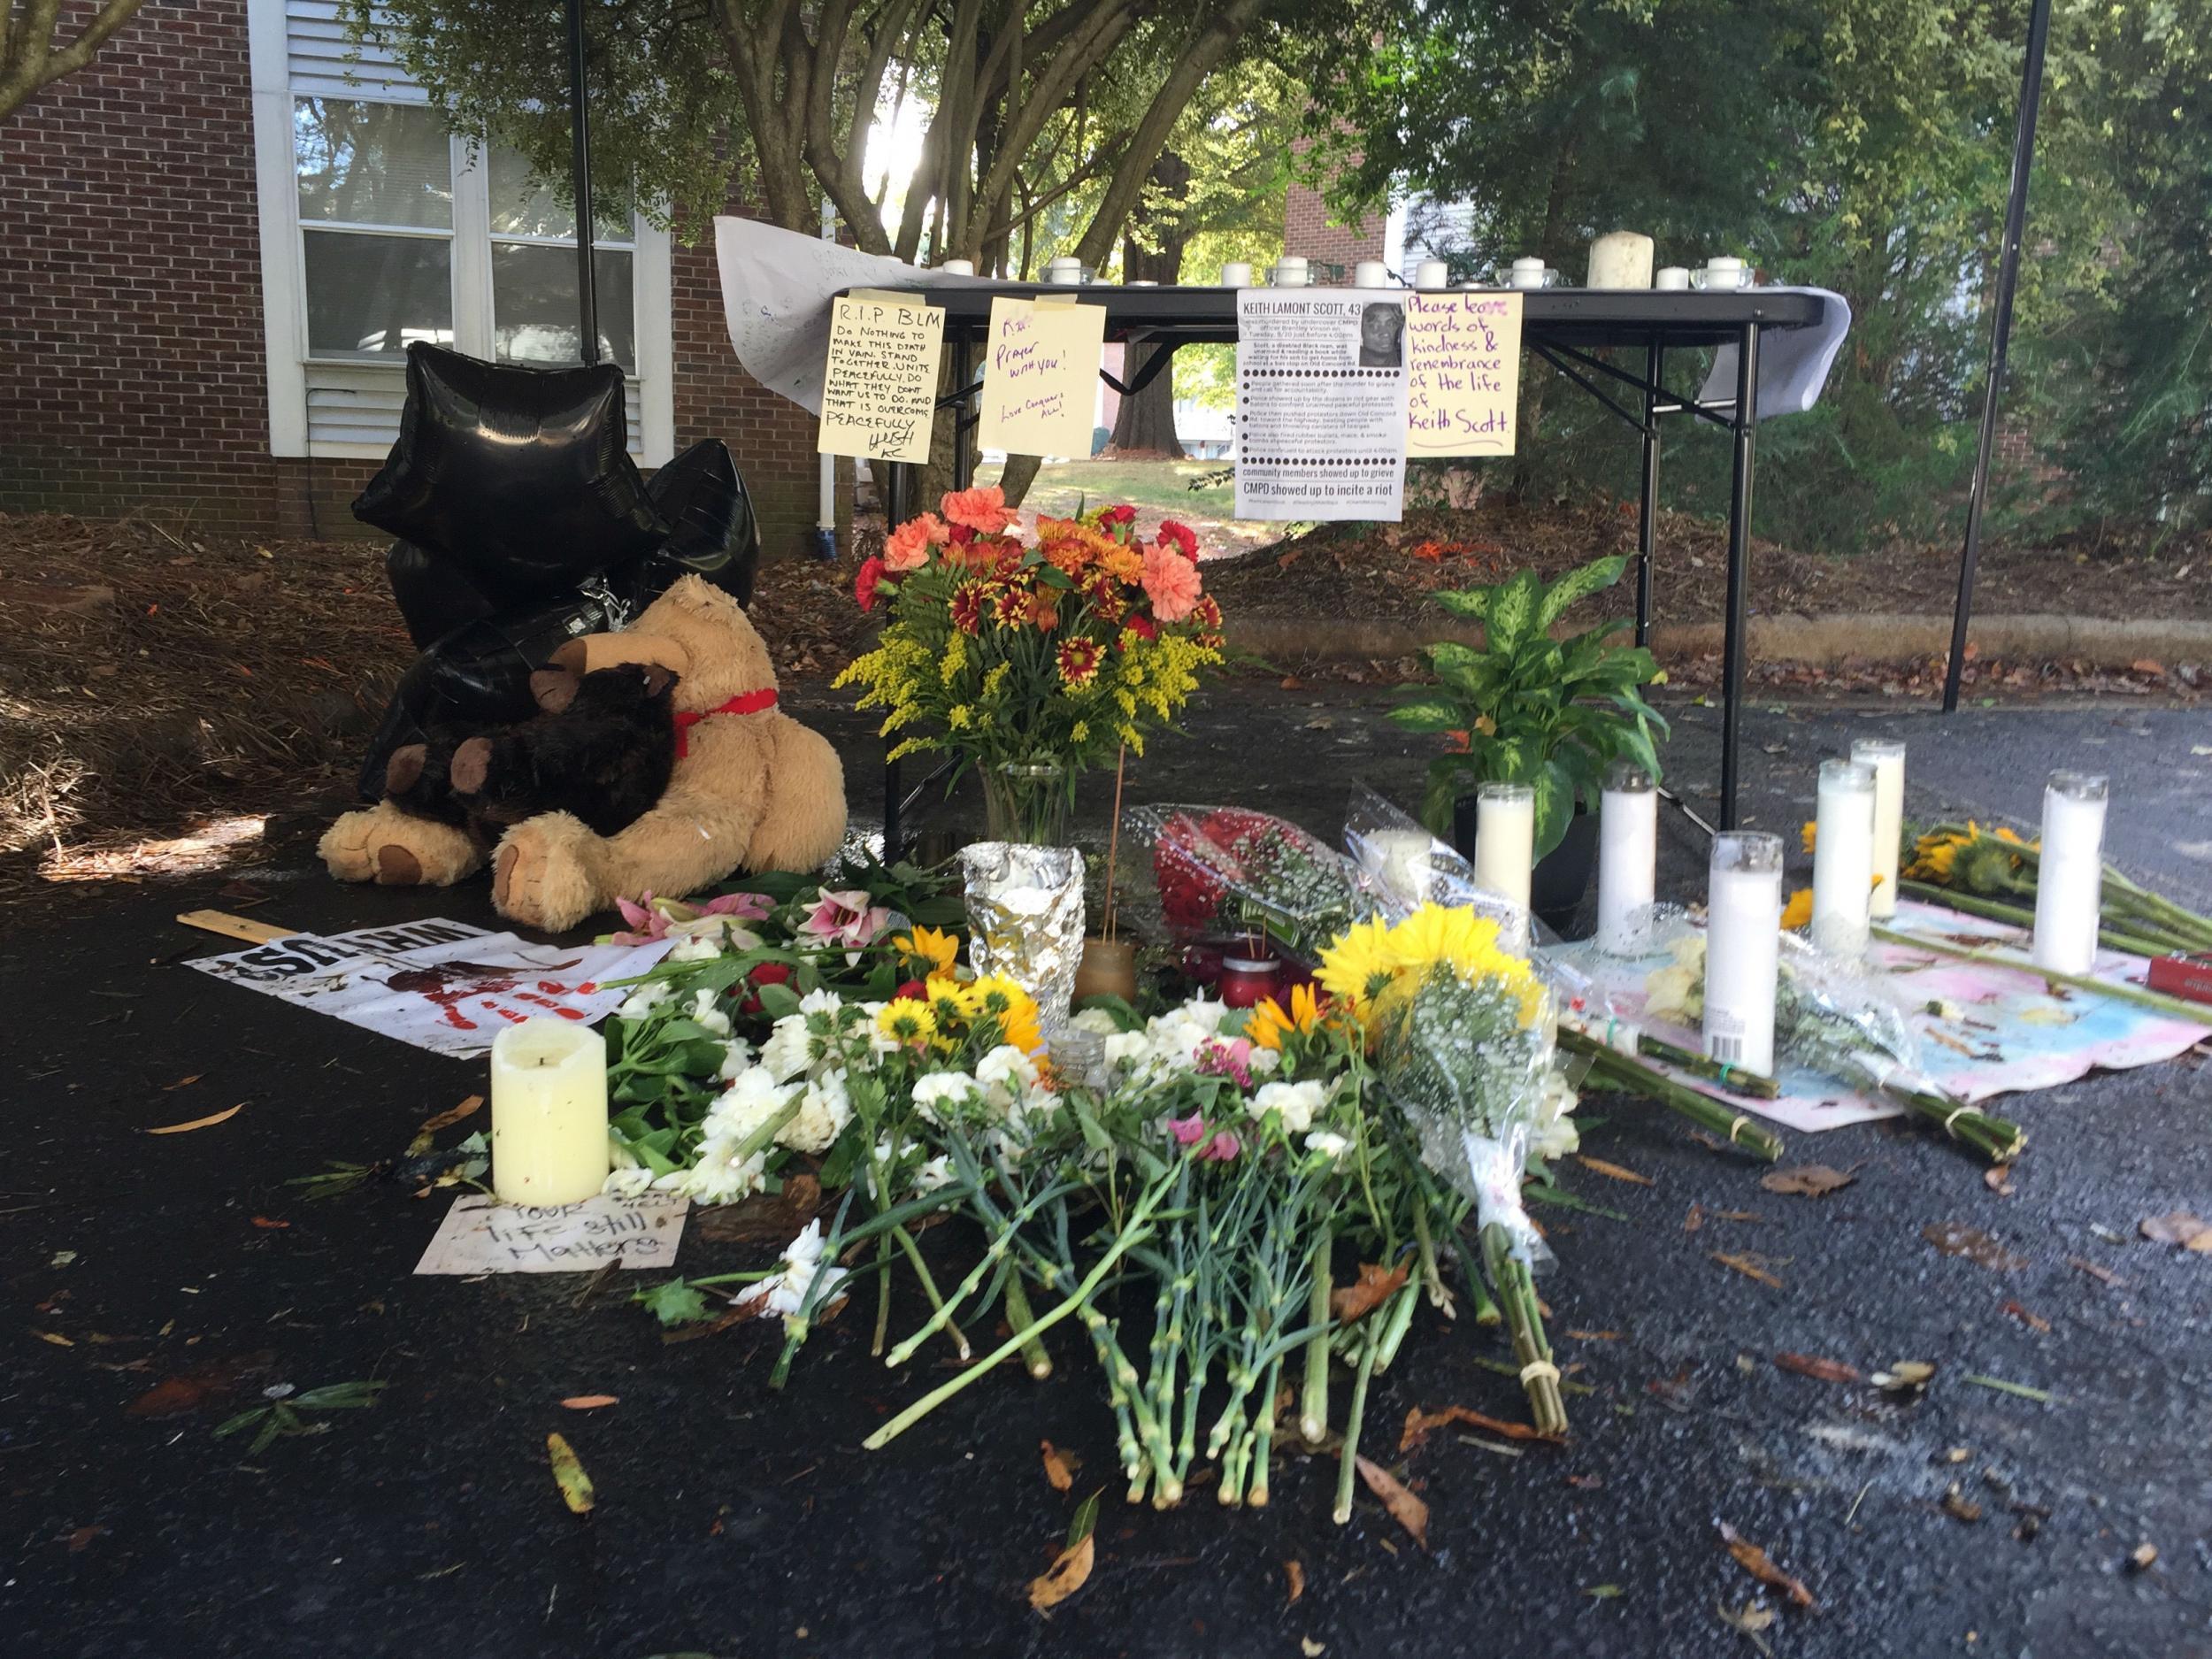 Friends set up a memorial where police killed Keith Lamont Scott